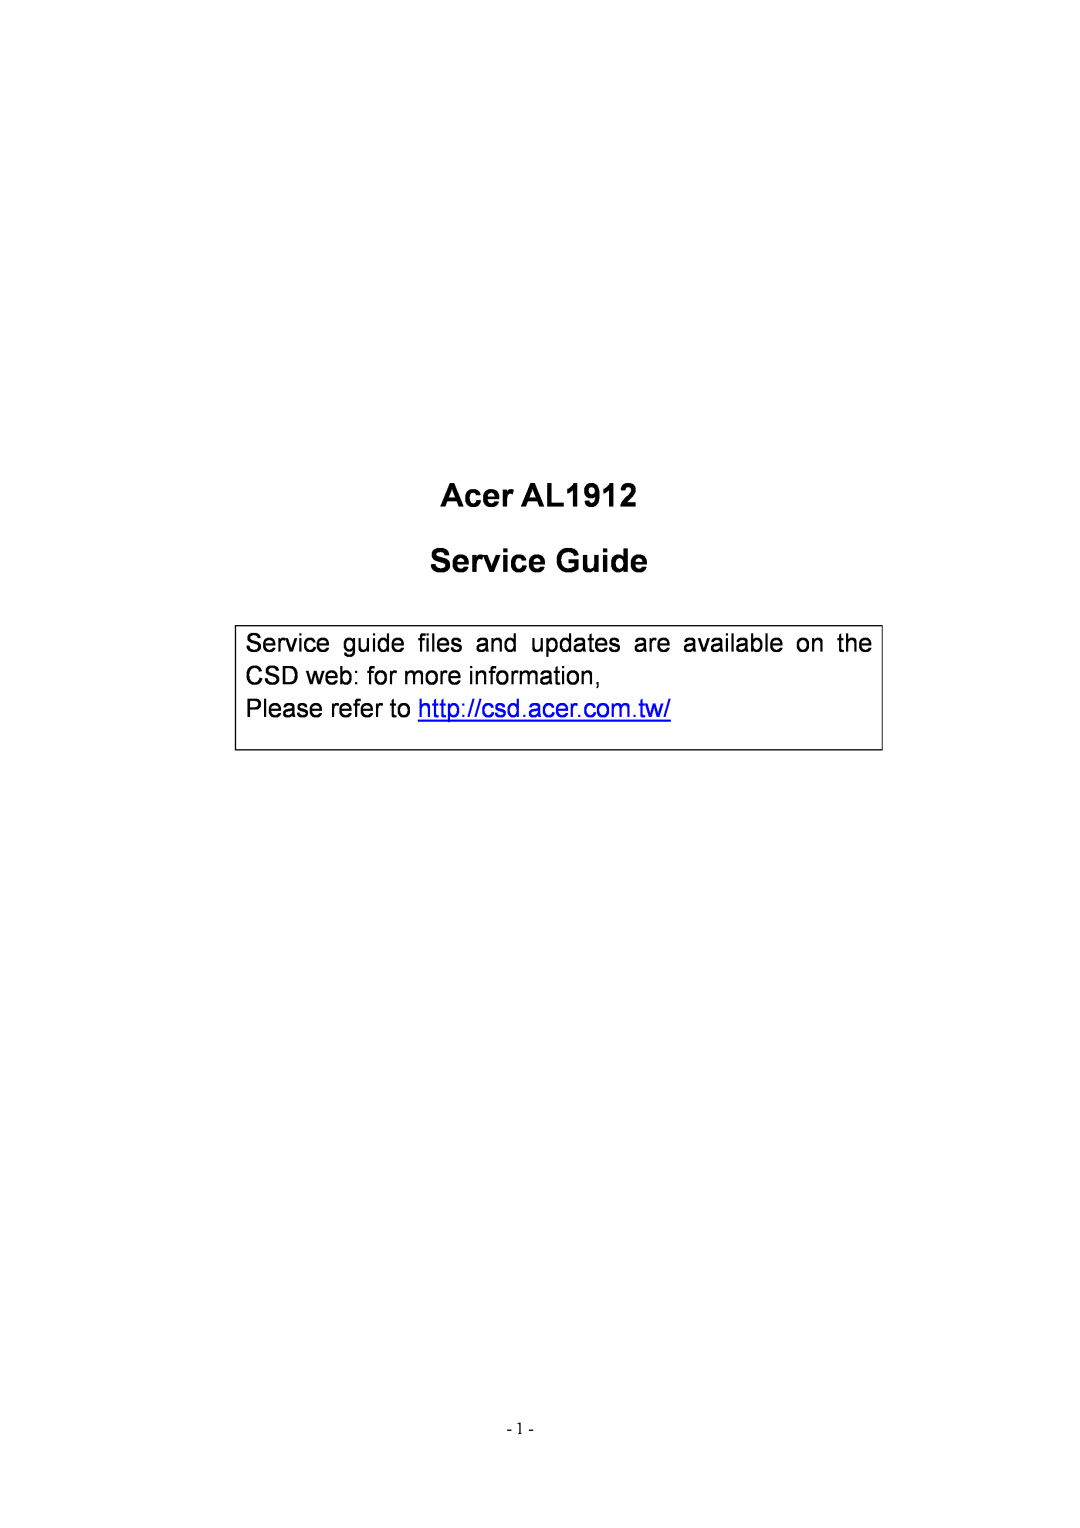 Acer manual Acer AL1912 Service Guide, Please refer to http//csd.acer.com.tw 